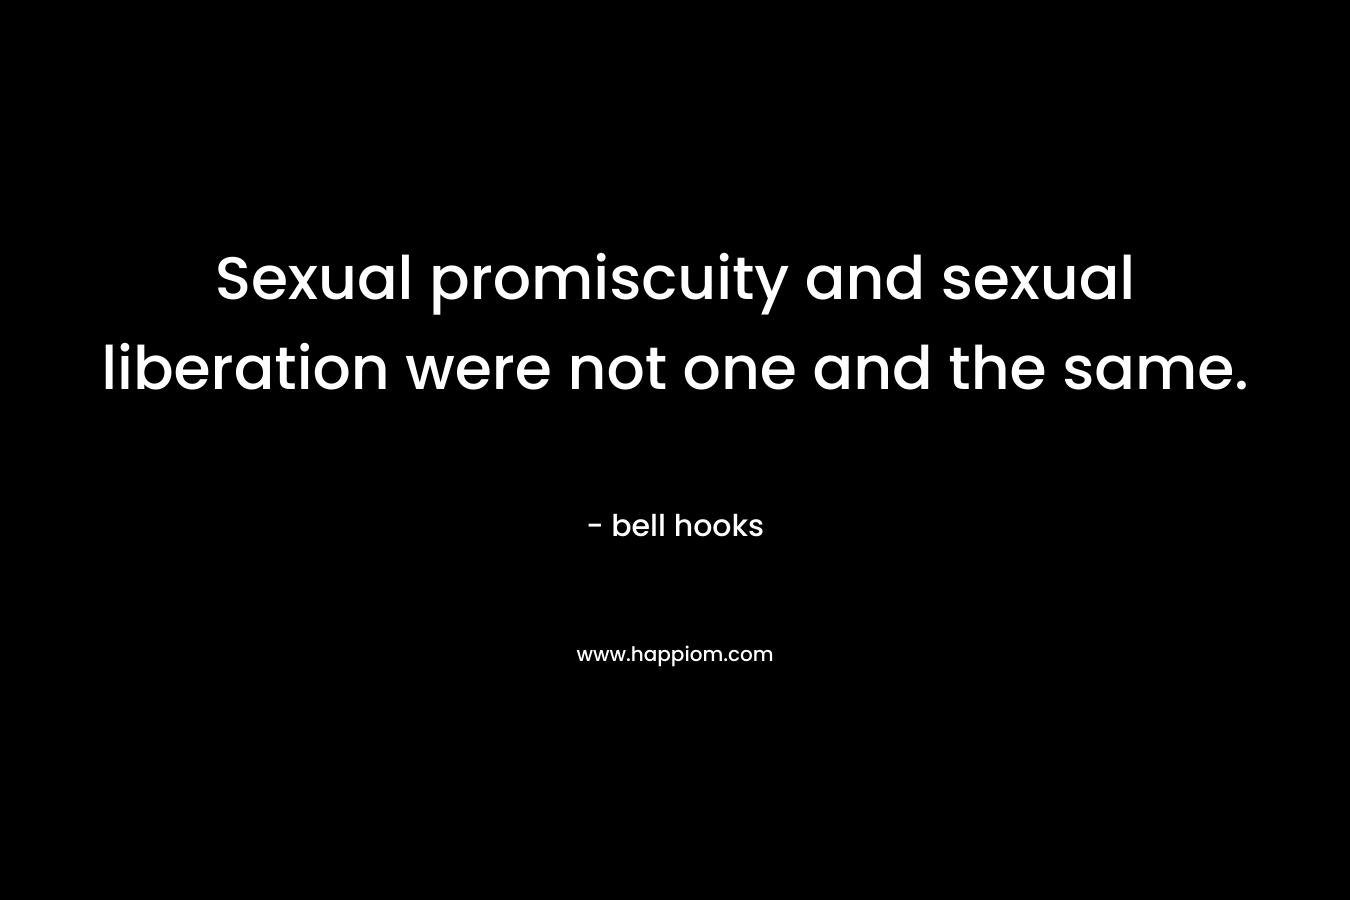 Sexual promiscuity and sexual liberation were not one and the same. – bell hooks